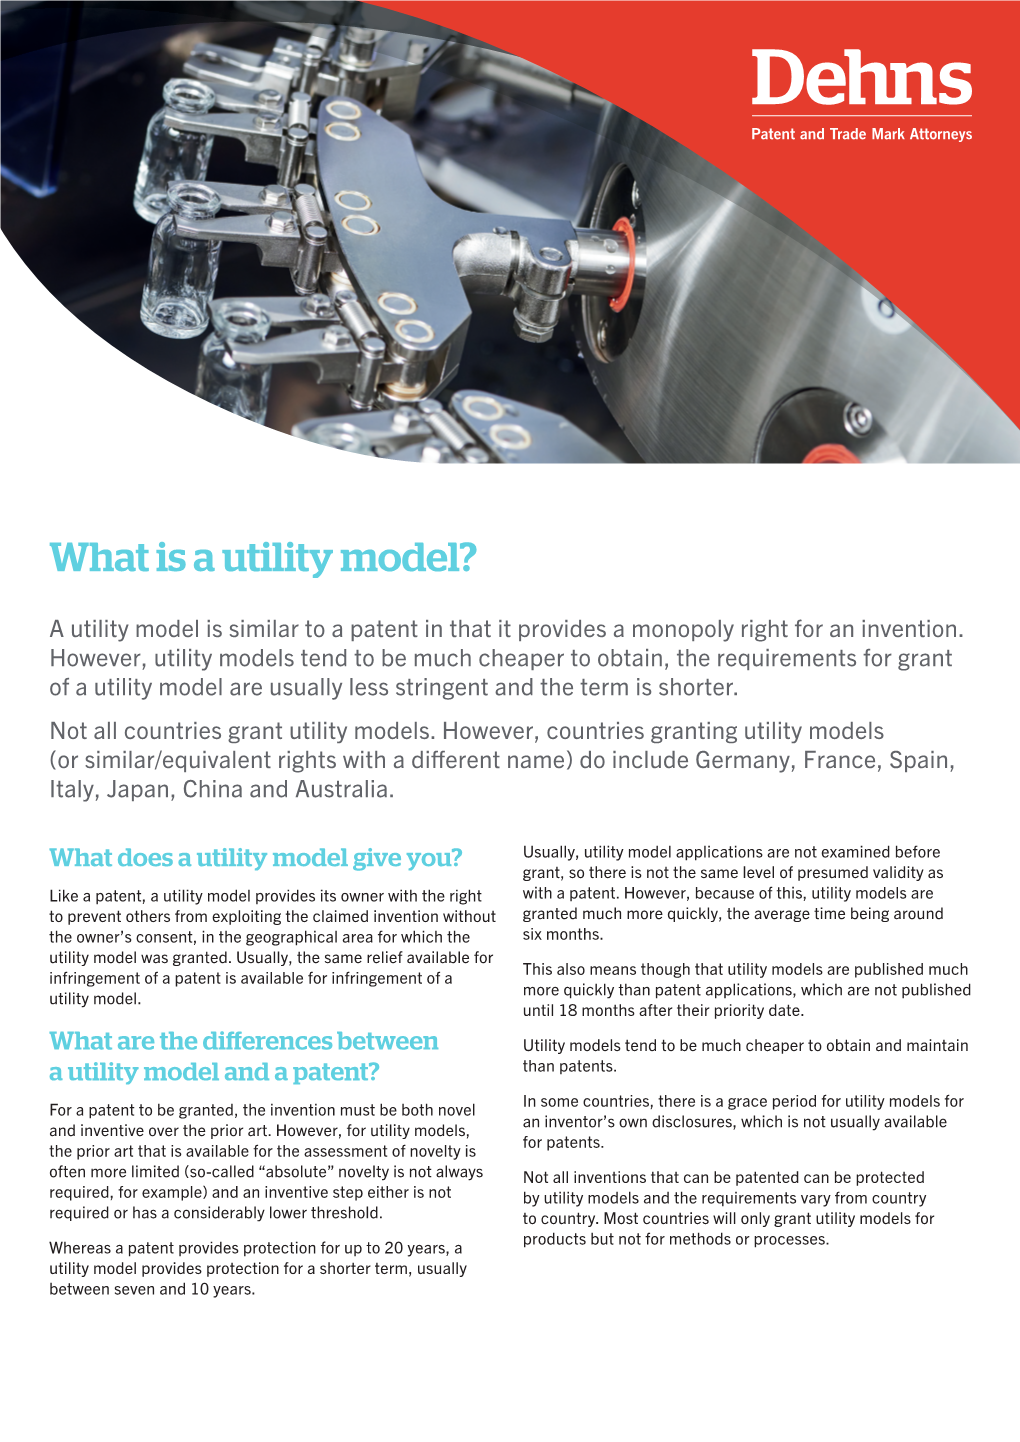 What Is a Utility Model?